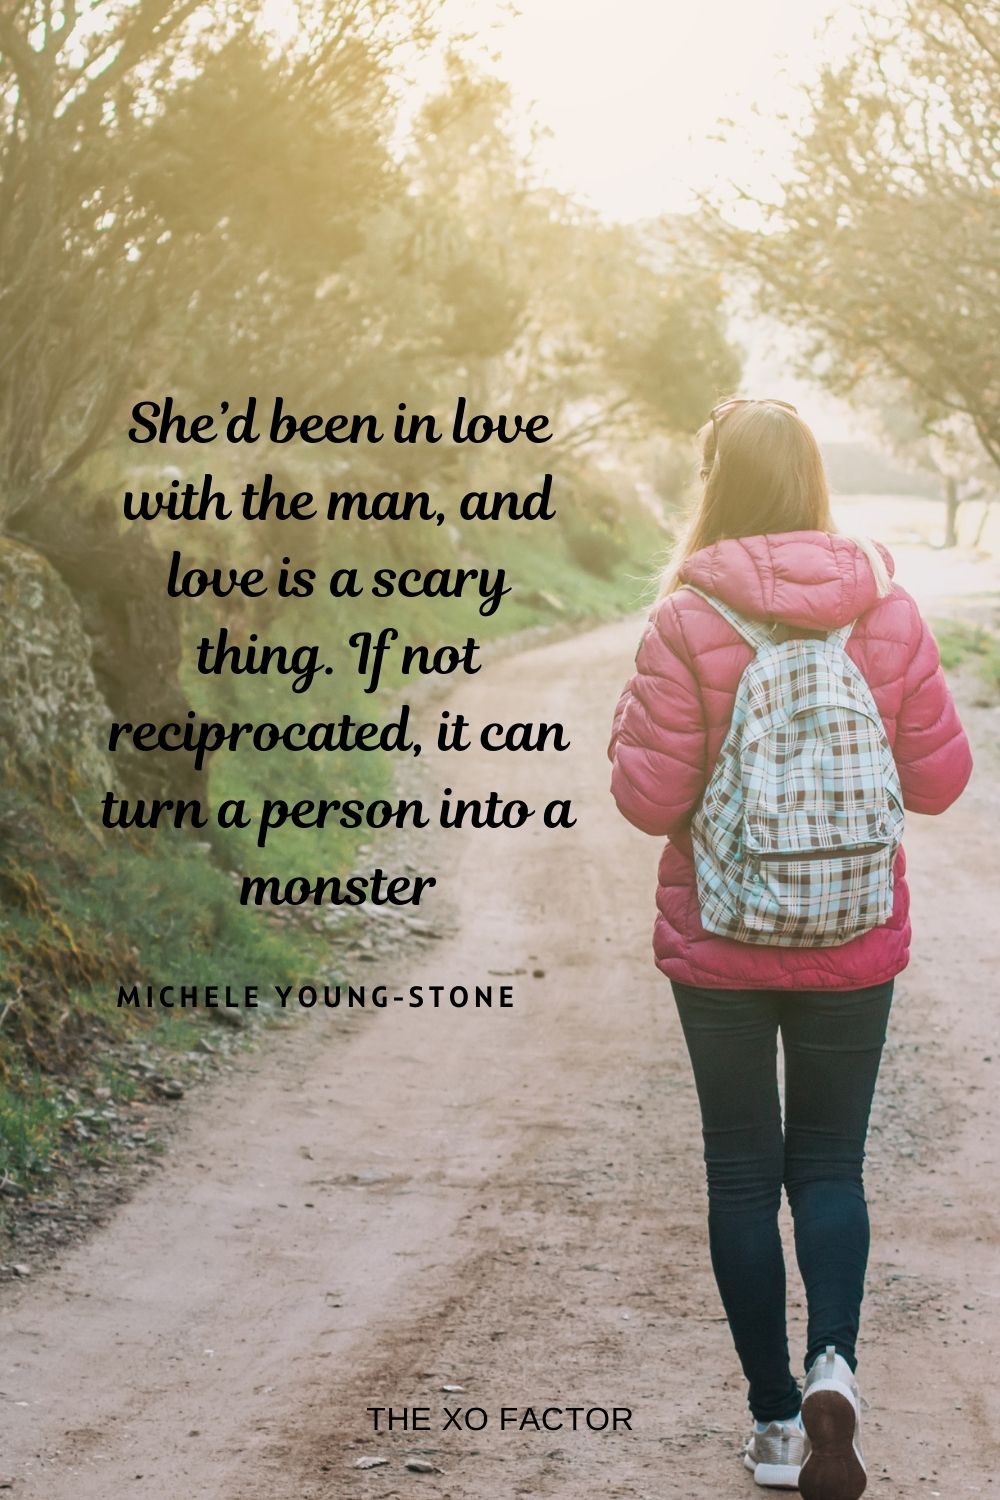 She’d been in love with the man, and love is a scary thing. If not reciprocated, it can turn a person into a monster. Michele Young-Stone